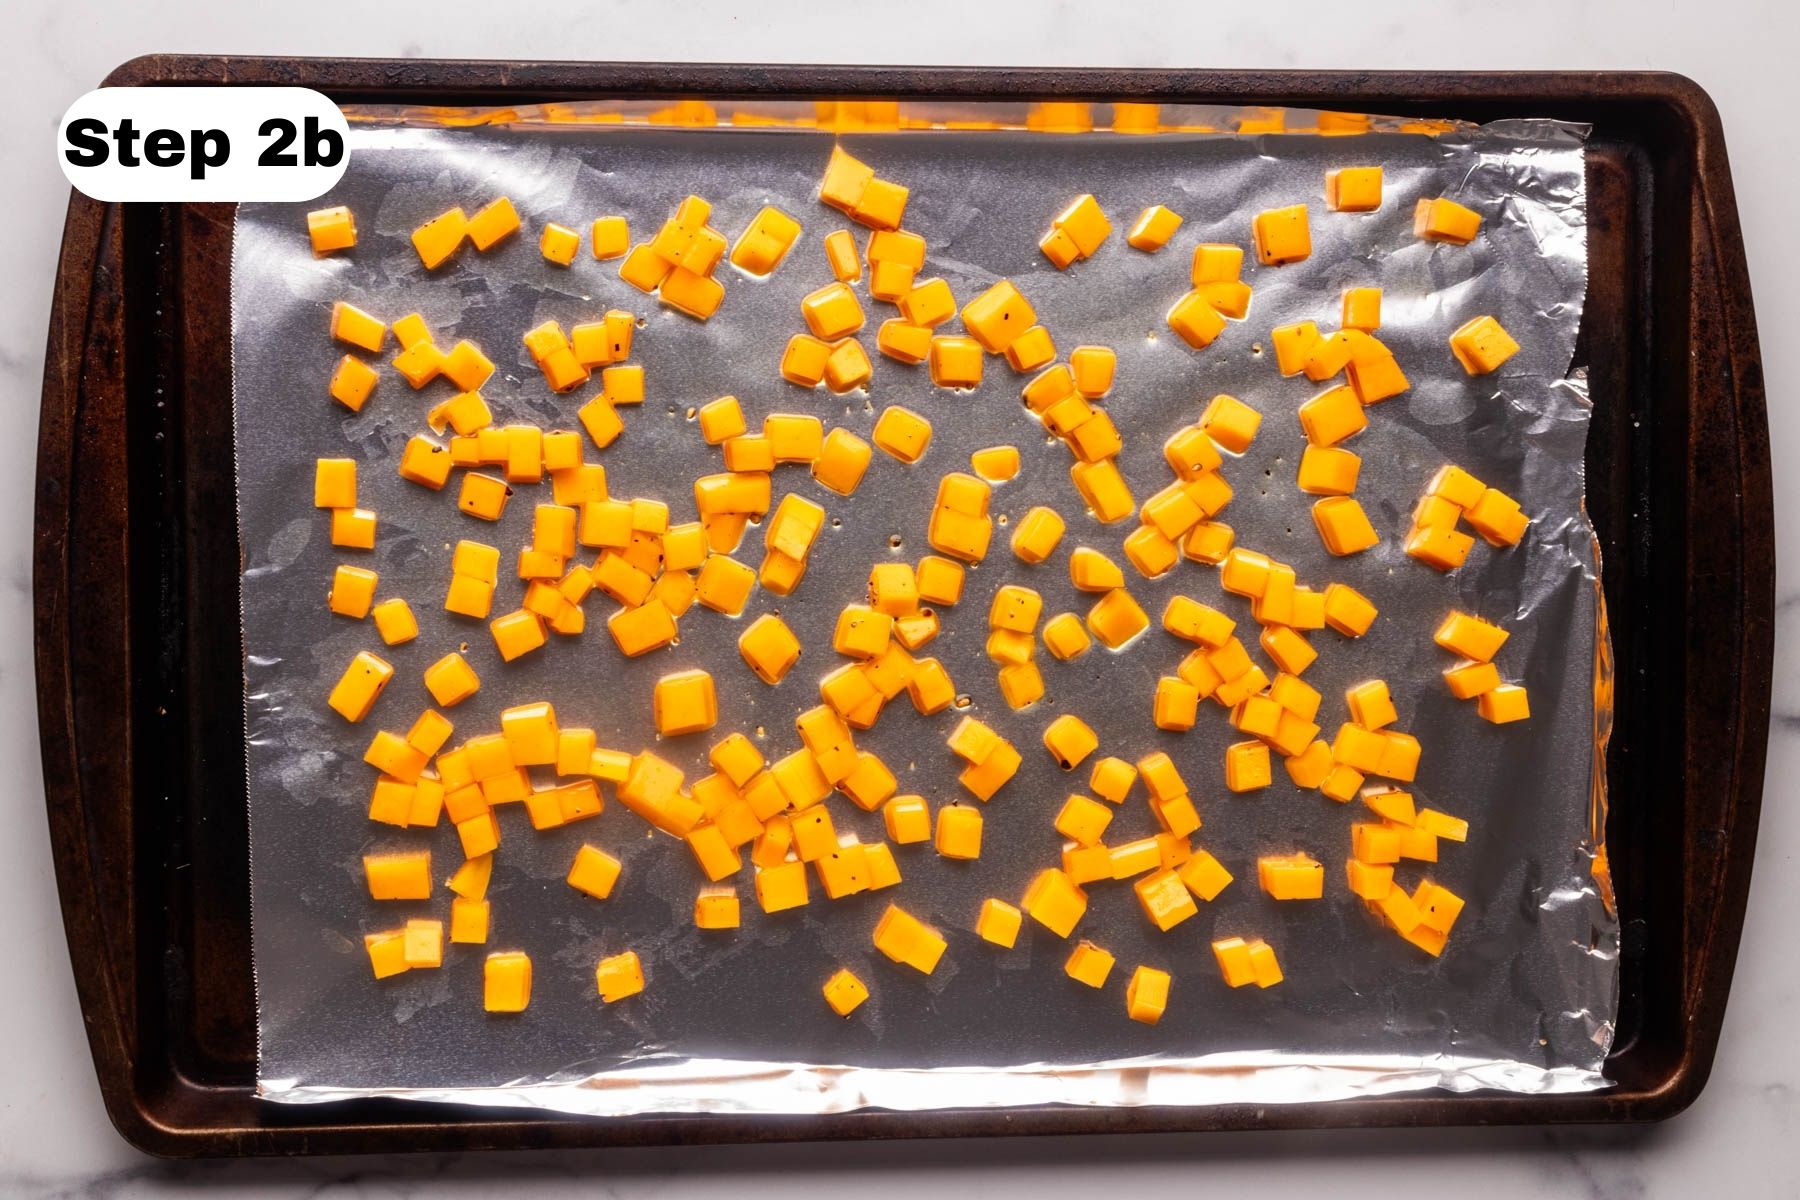 Diced butternut squash on a baking sheet lined with foil